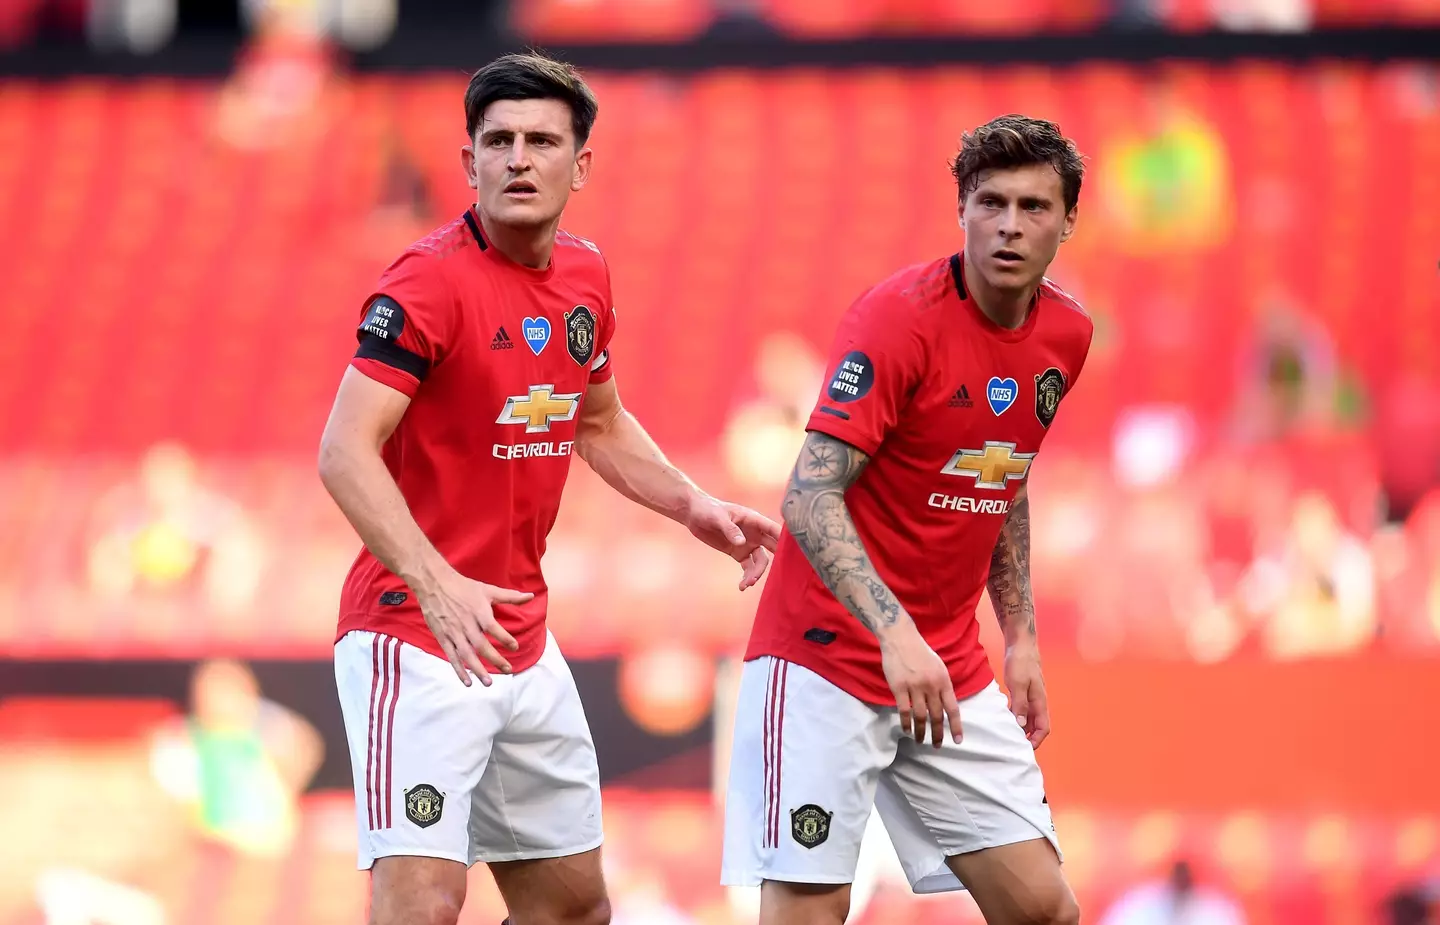 One of Harry Maguire or Victor Lindelof will start at the Spotify Camp Nou. (Image